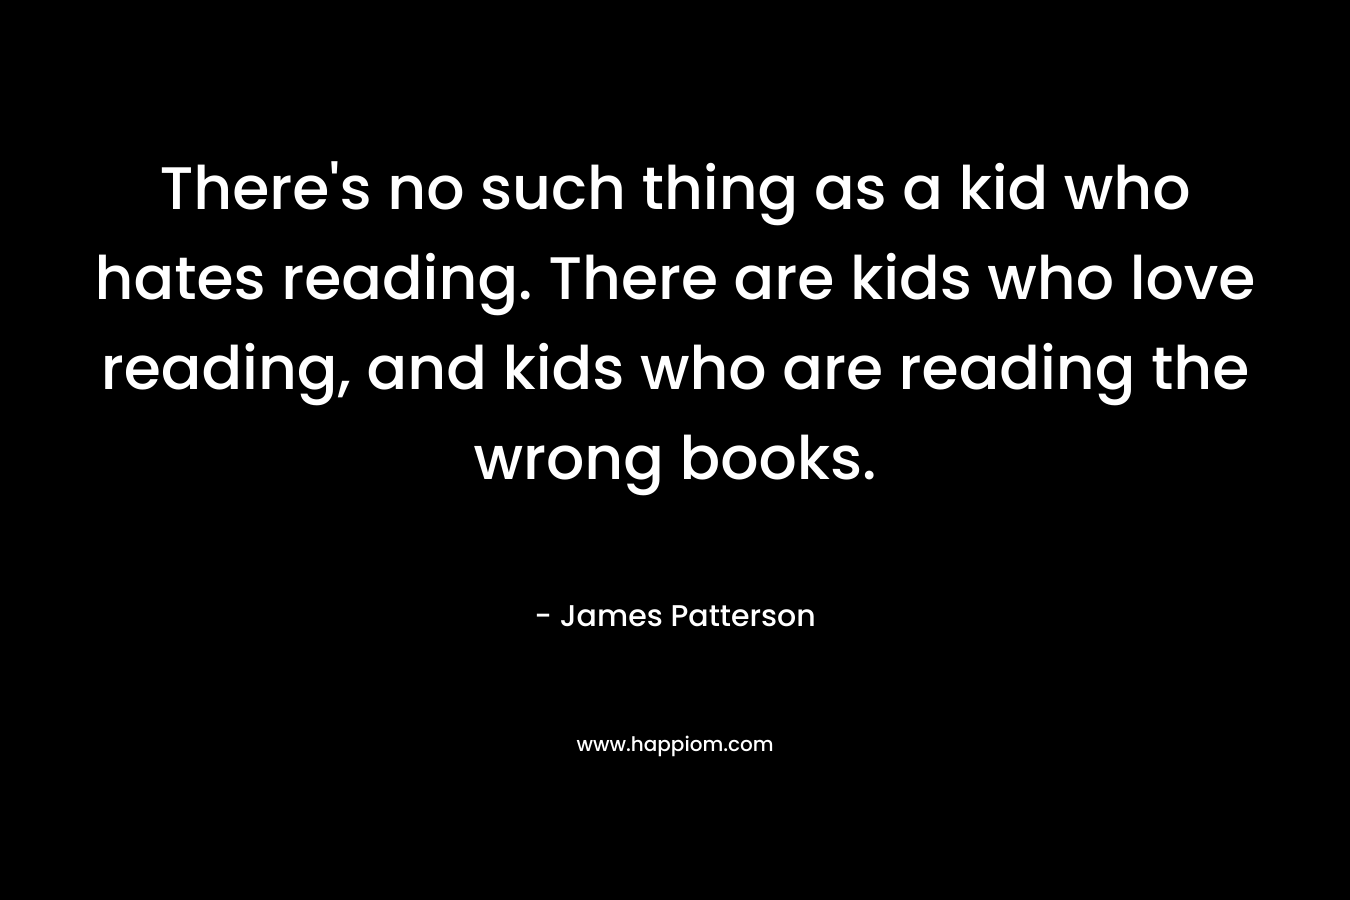 There's no such thing as a kid who hates reading. There are kids who love reading, and kids who are reading the wrong books.